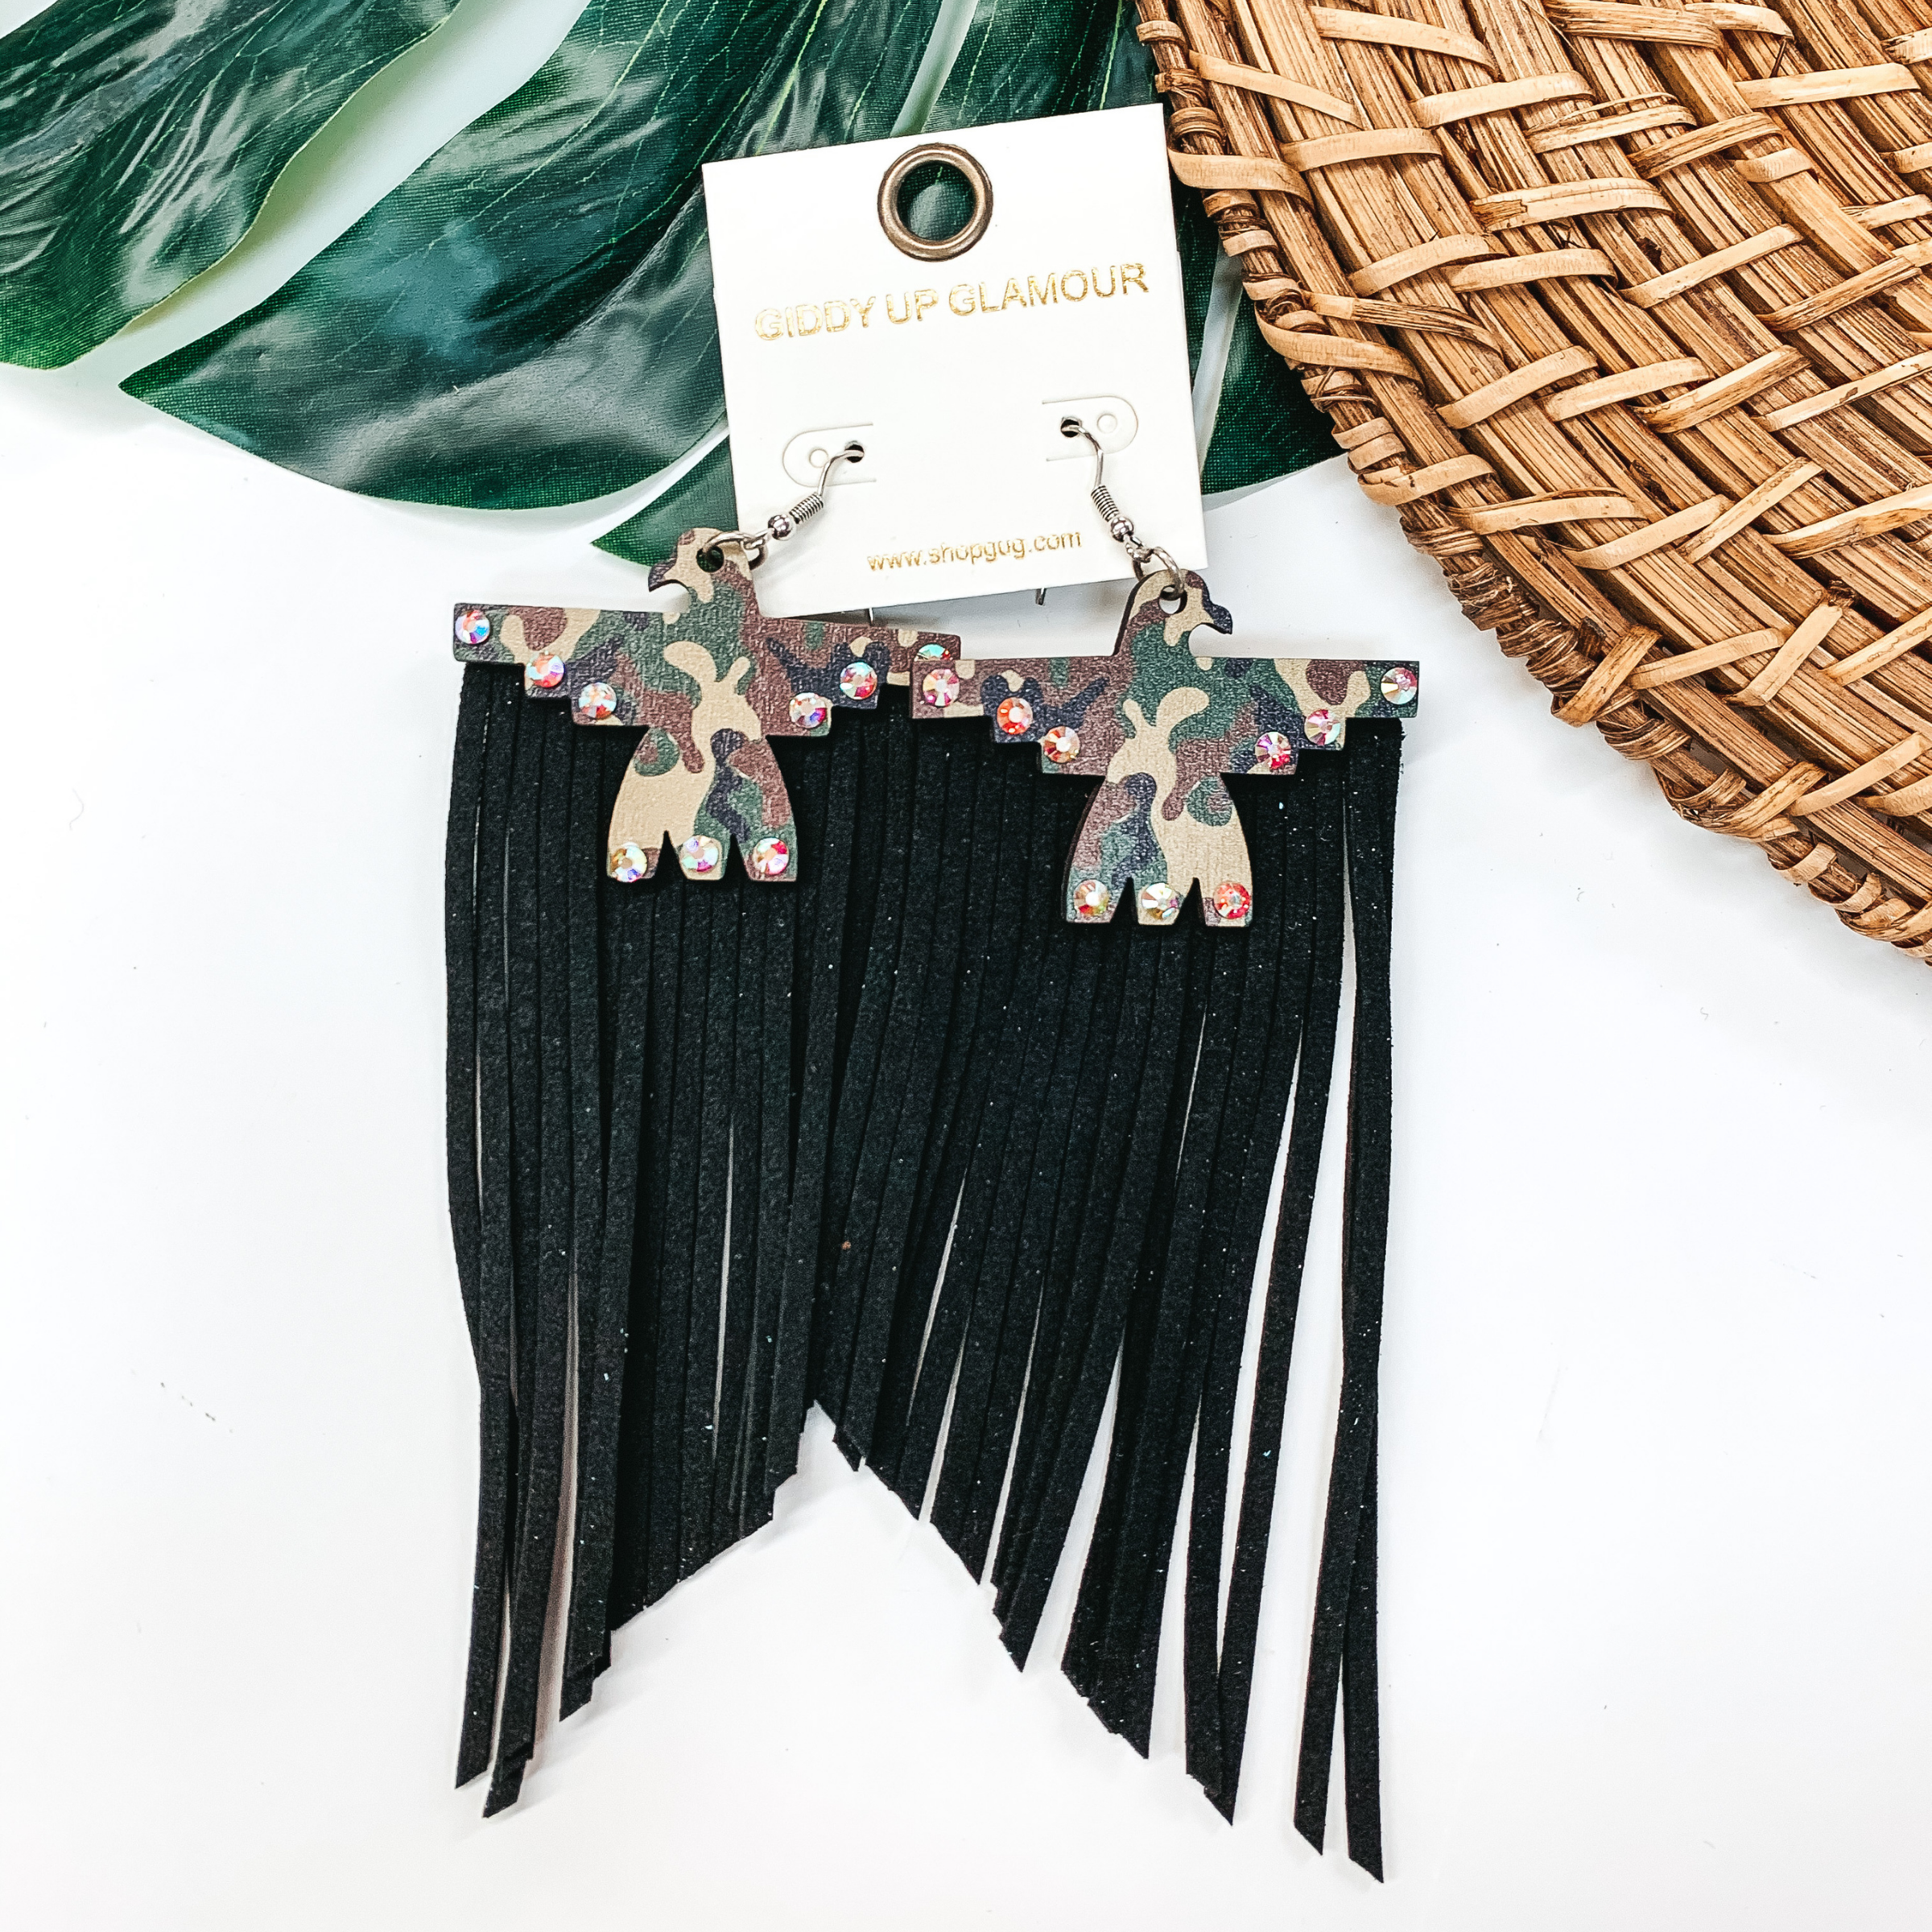 Camo Thunderbird Wood Earrings with Black Tassels - Giddy Up Glamour Boutique